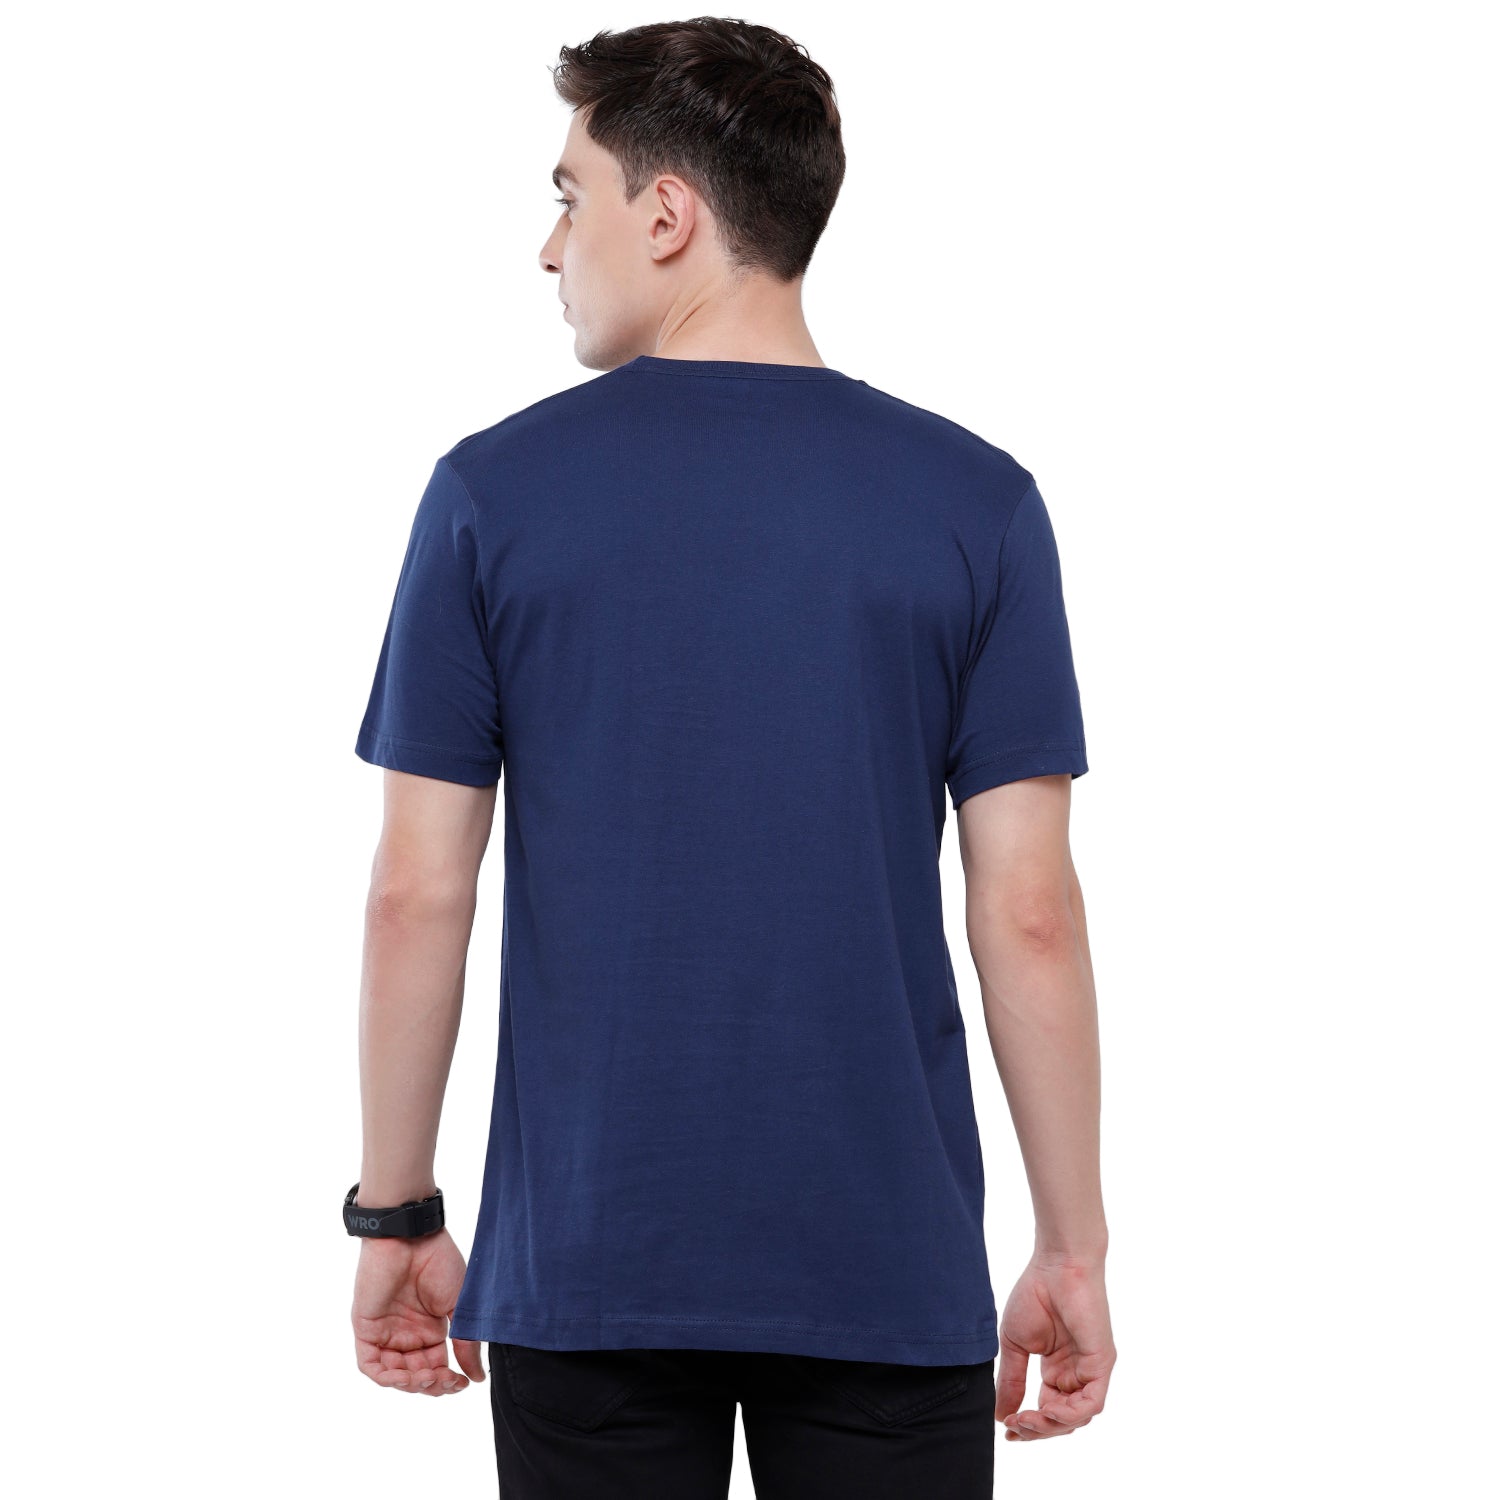 Classic polo Men's Basic Solid Single Jersey Crew Half Sleeve Slim Fit T-Shirt ( Trio Pack) - Ceres - 05 Classic Polo 